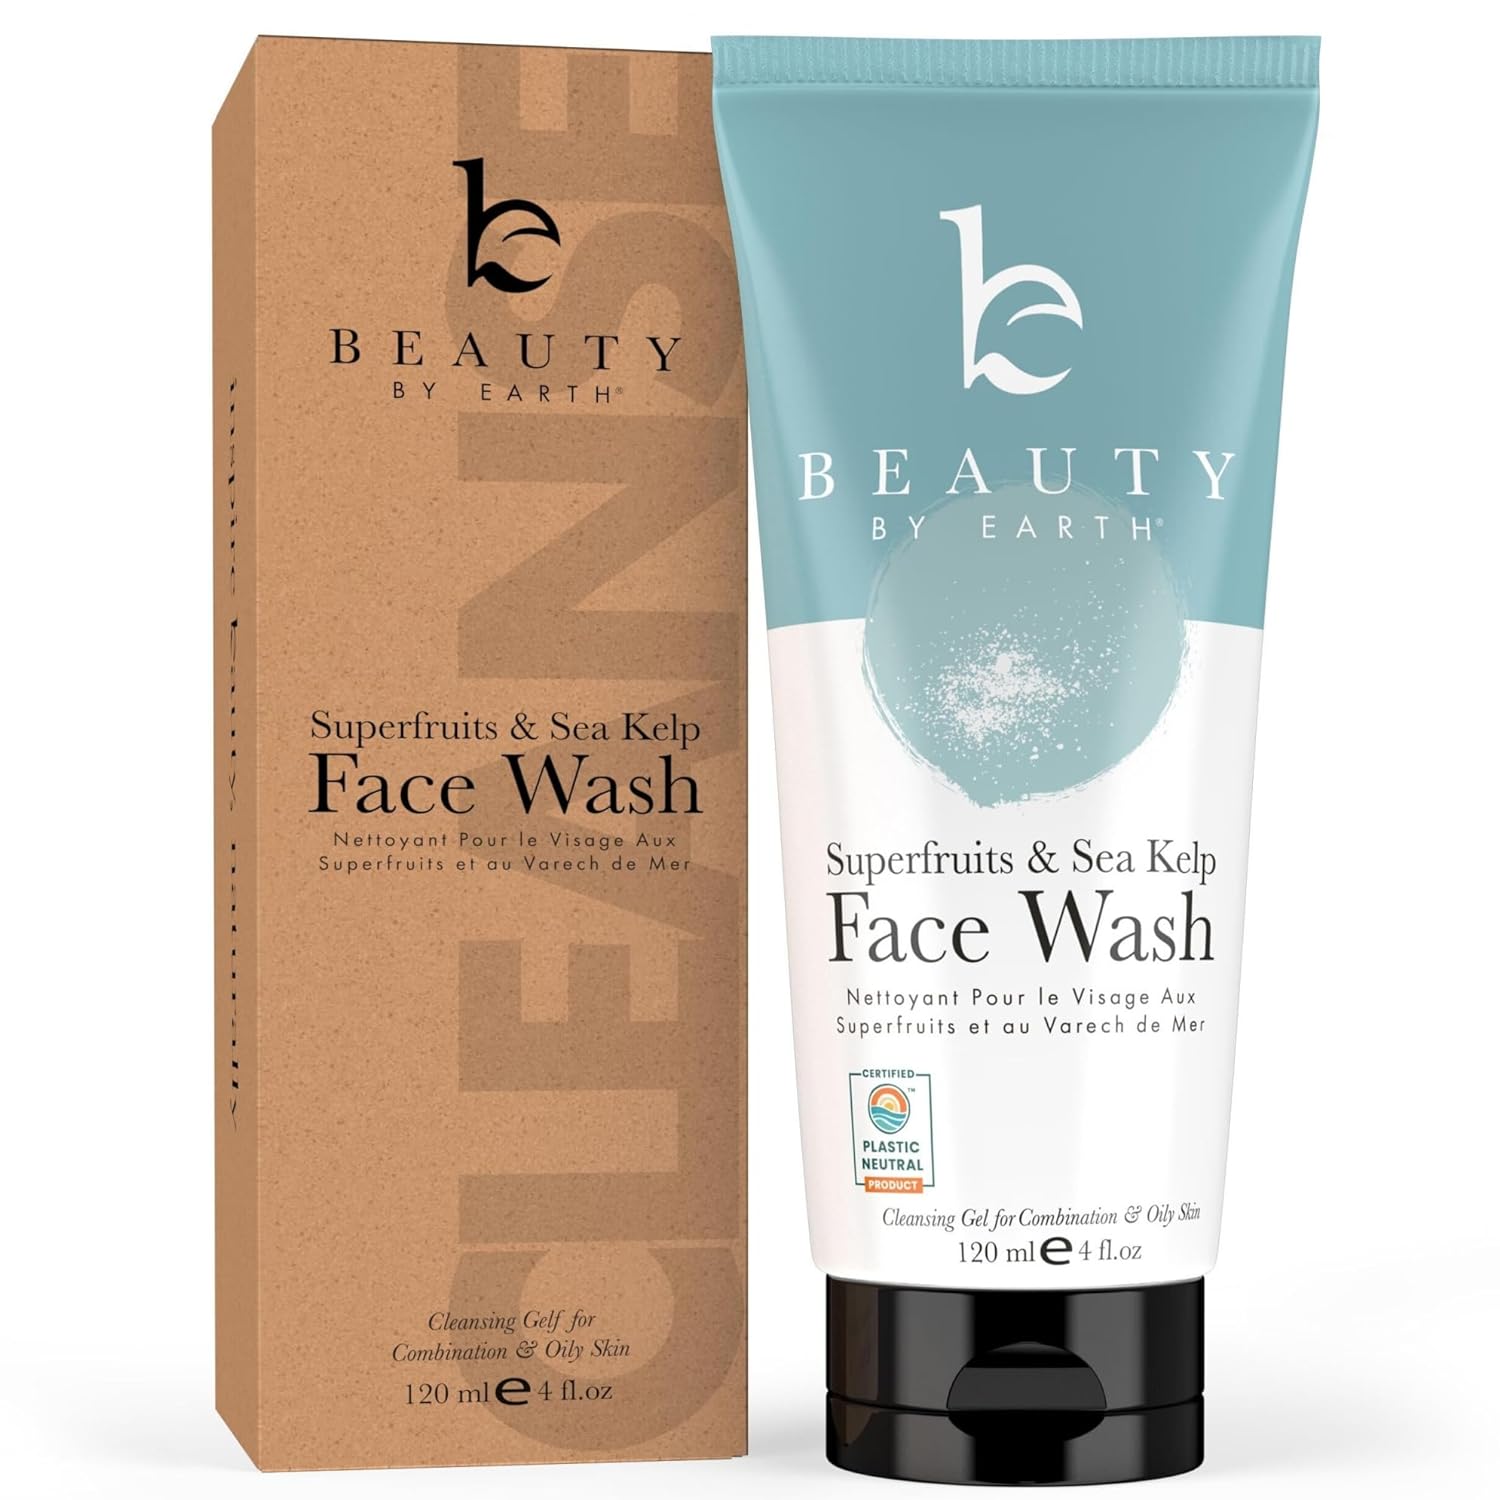 Face Wash - USA Made with Natural & Organic Ingredients, Facial Cleanser for Acne Prone, Combination and Oily Skin, Non Toxic Face Wash for Sensitive Skin, Gentle Face Cleanser for Women & Men